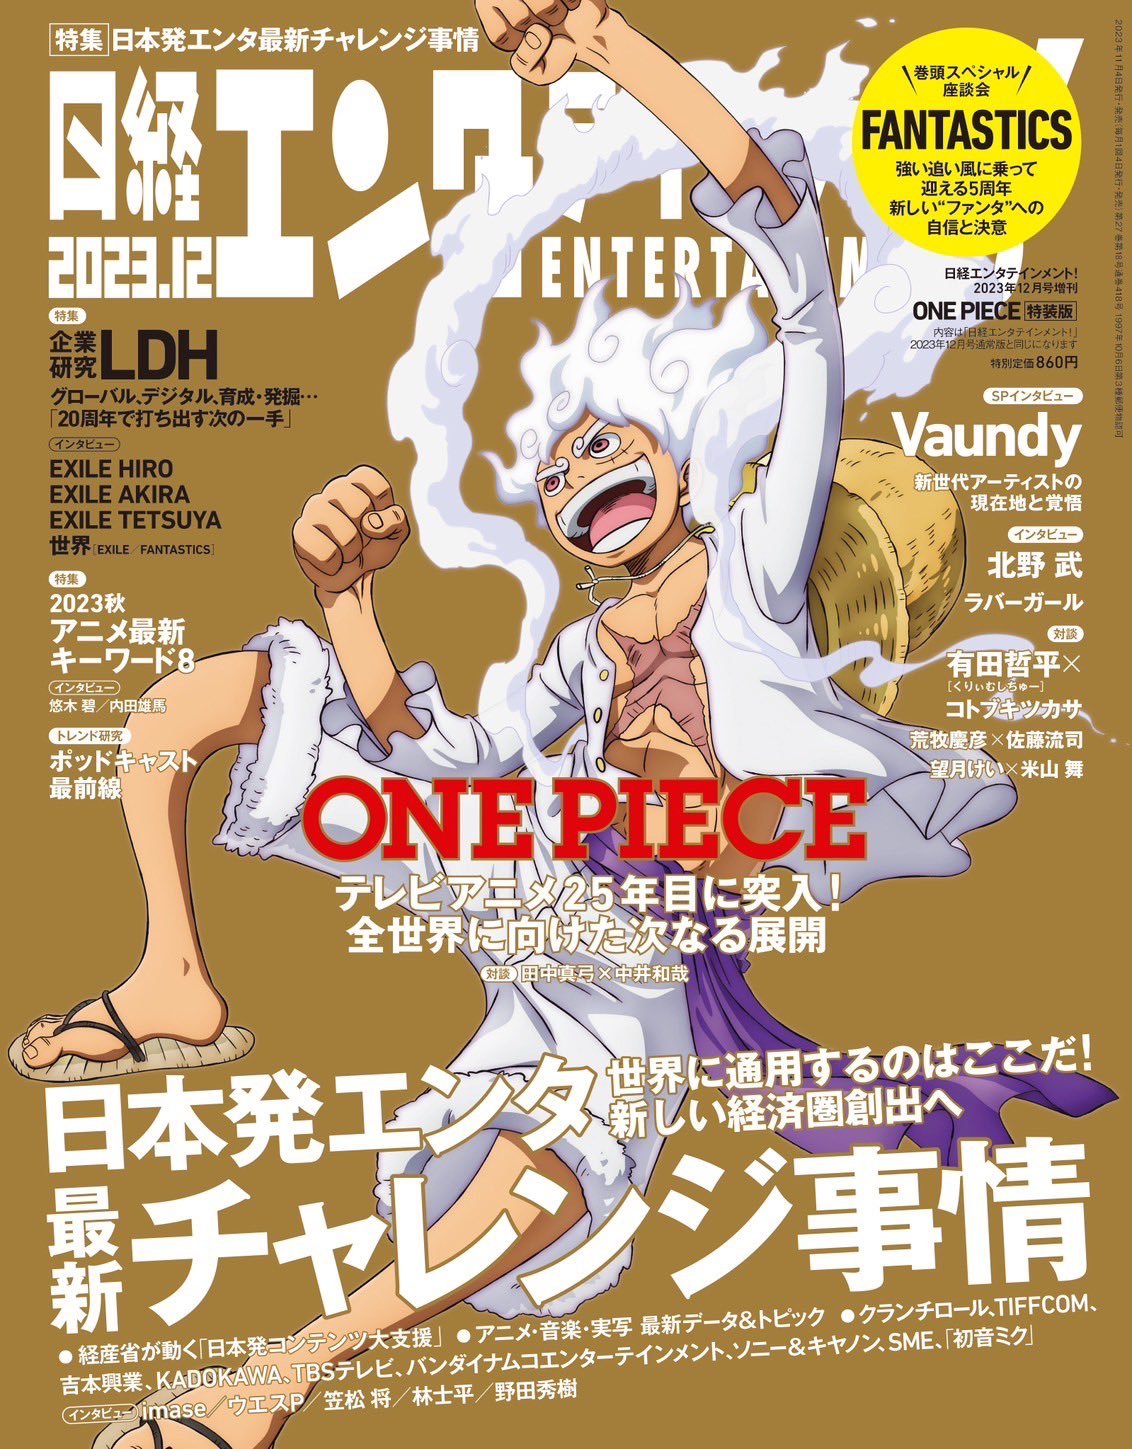 Pew on X: Most likely the new Onepiece volume 107 (SBS) will be